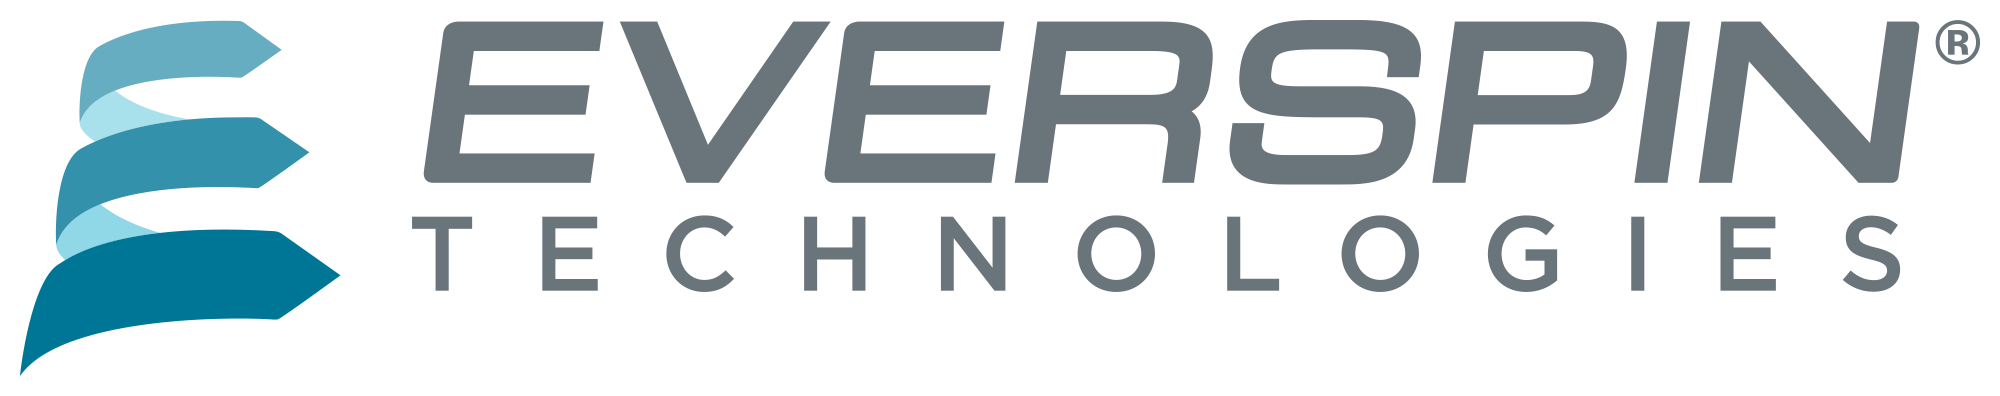 EVERSPIN TECHNOLOGIES